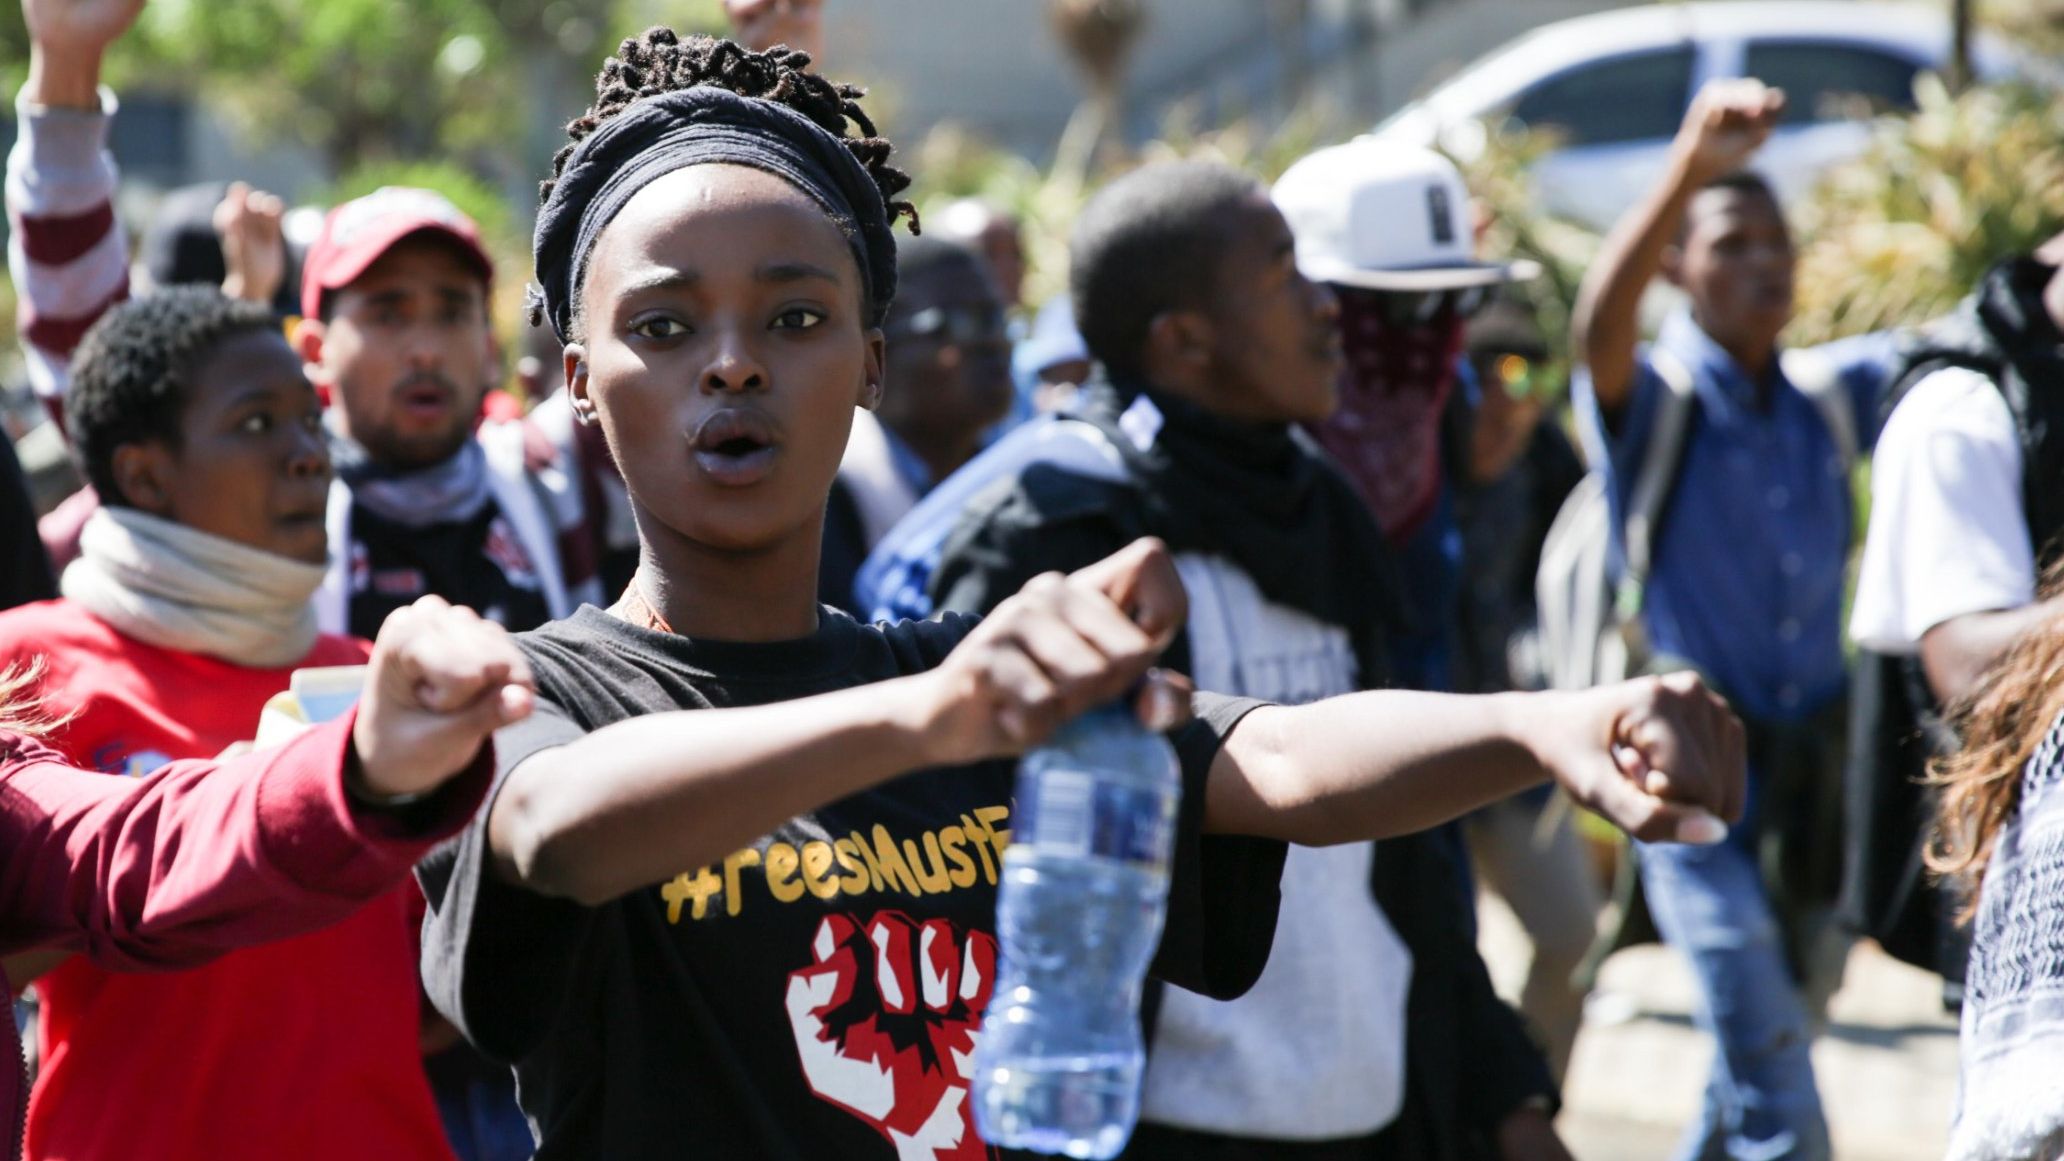 Student leader Busisiwe Seabe marches during Monday's protest. She says students feel abandoned by the government and the University of Witwatersrand.